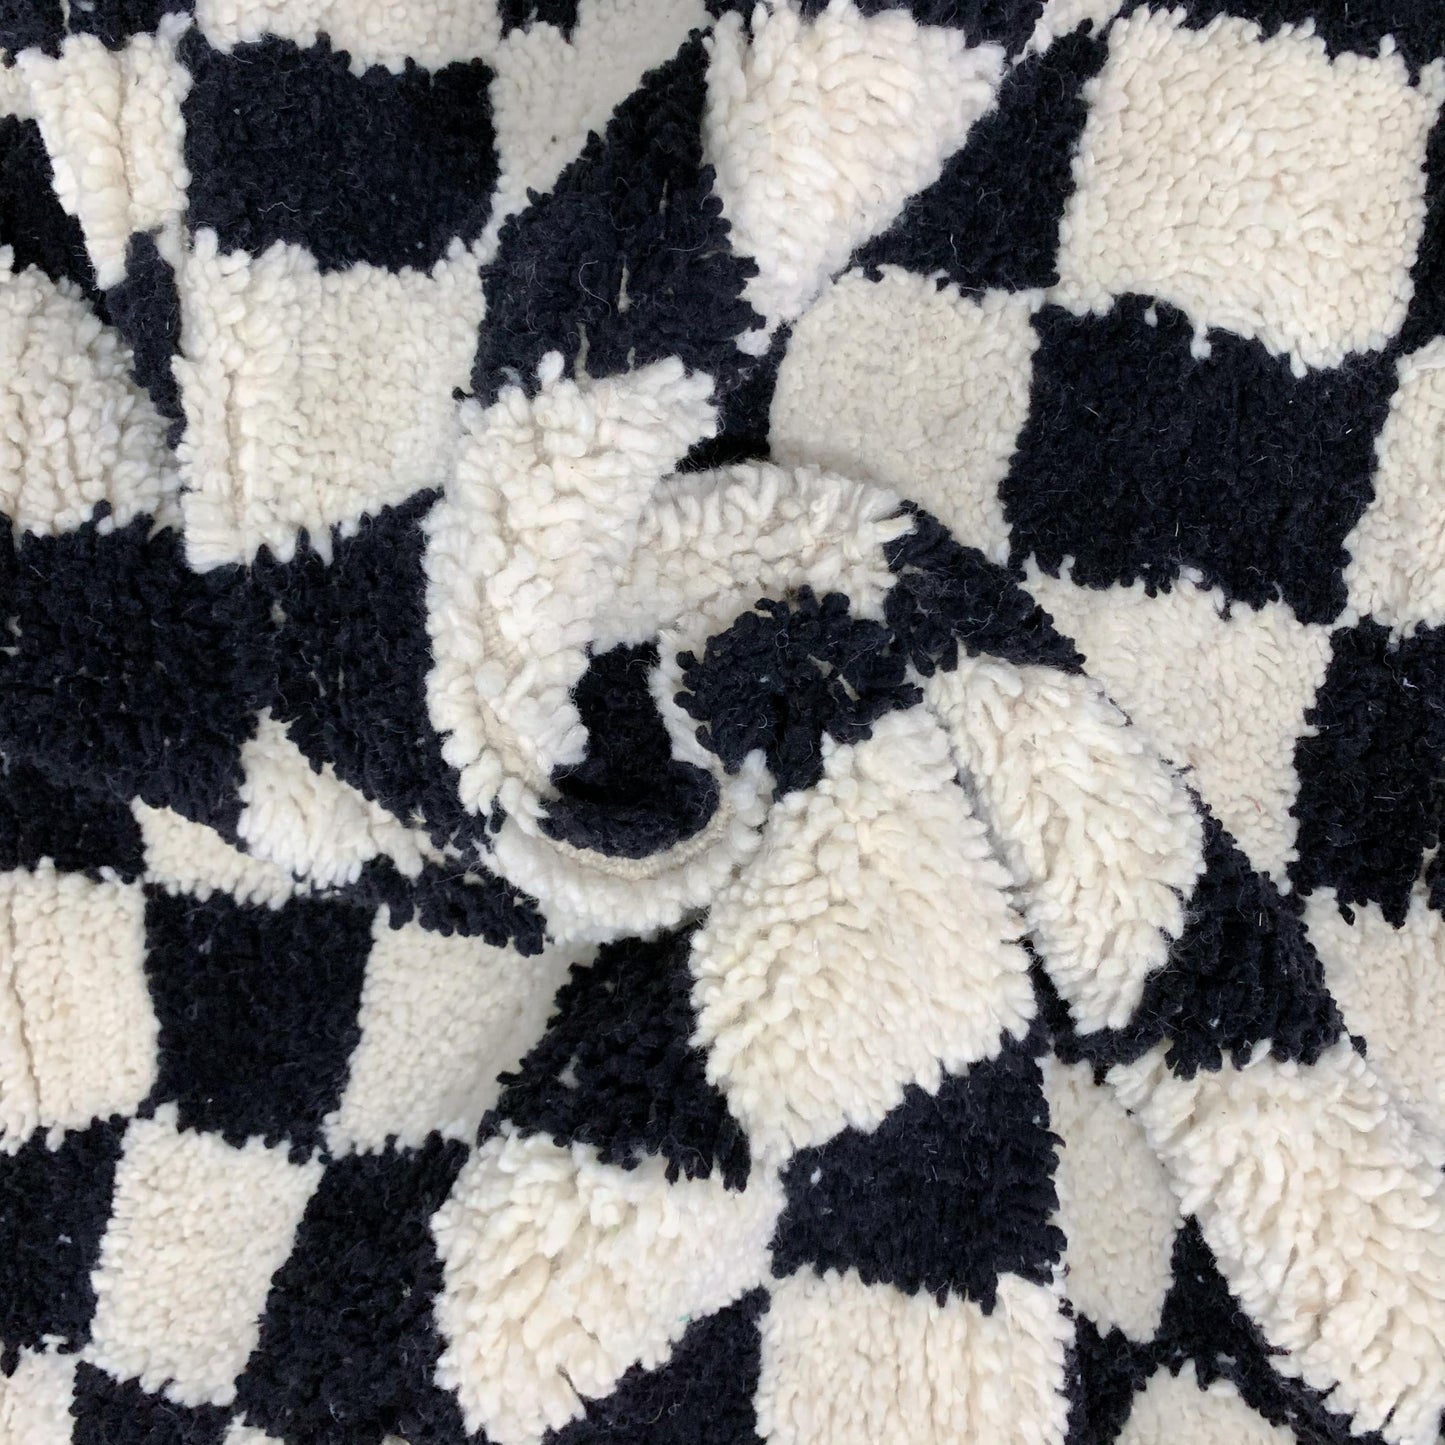 wool-of-mwoven-Moroccan-black-and-white-checkered-rug